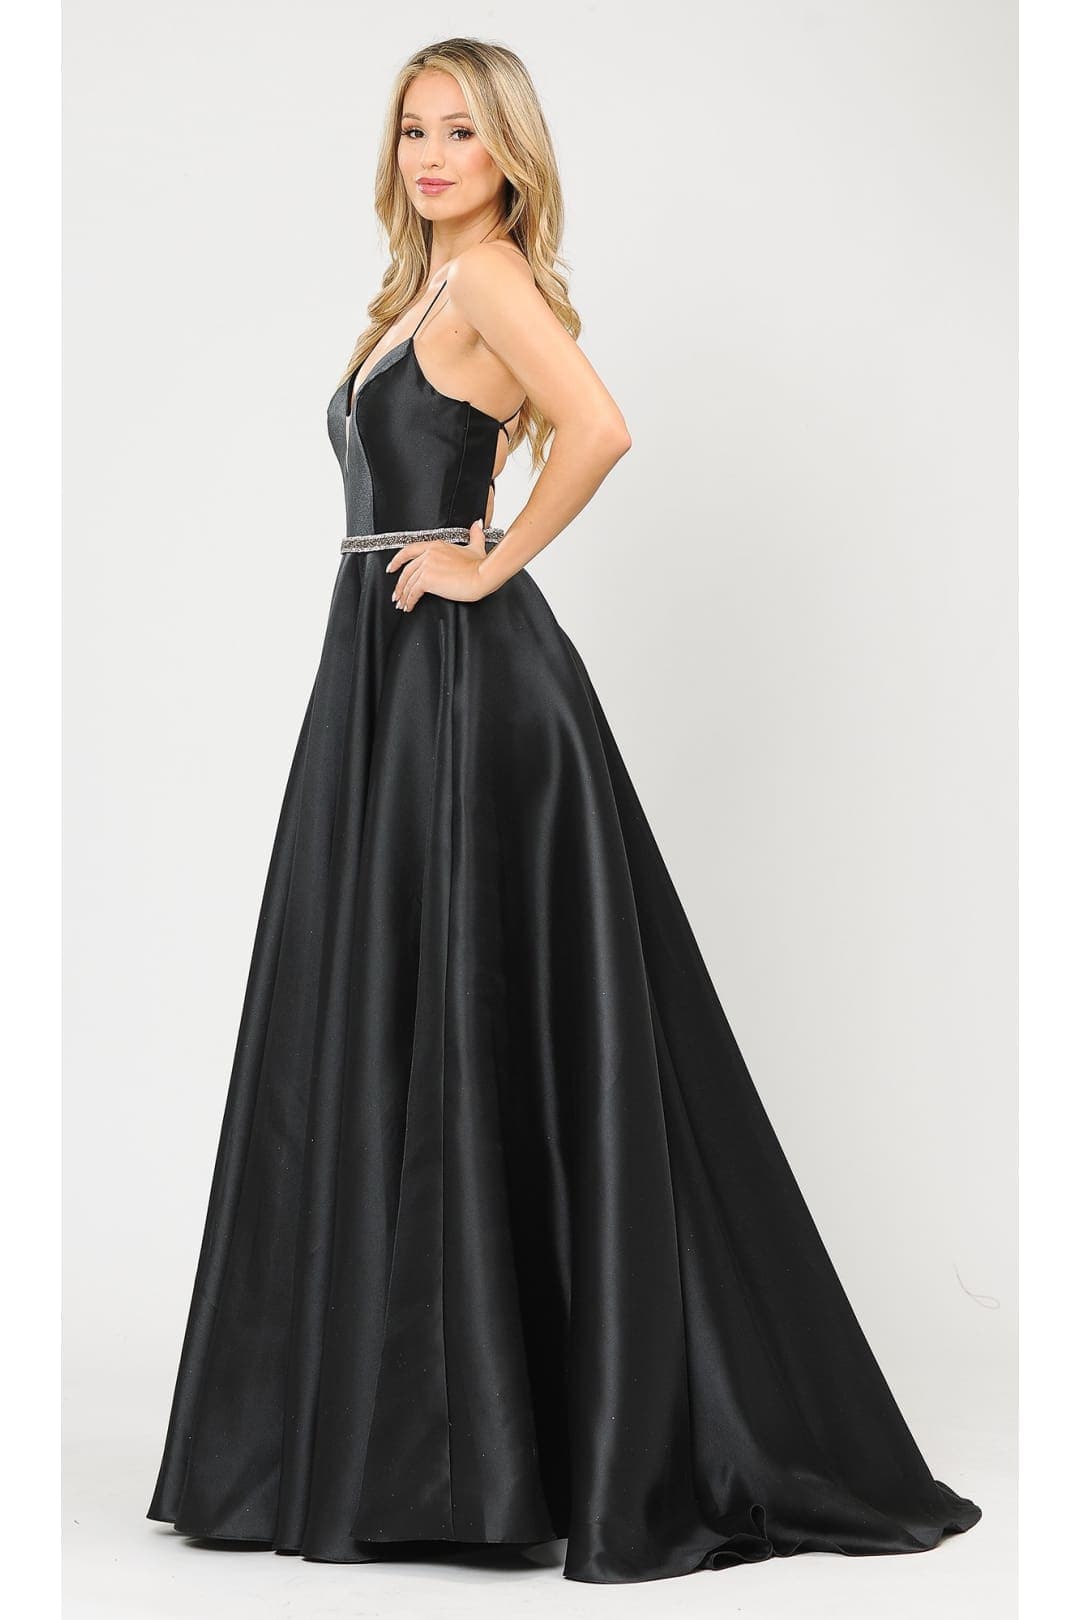 Special Occasion Classy Formal Gown - BLACK / XS